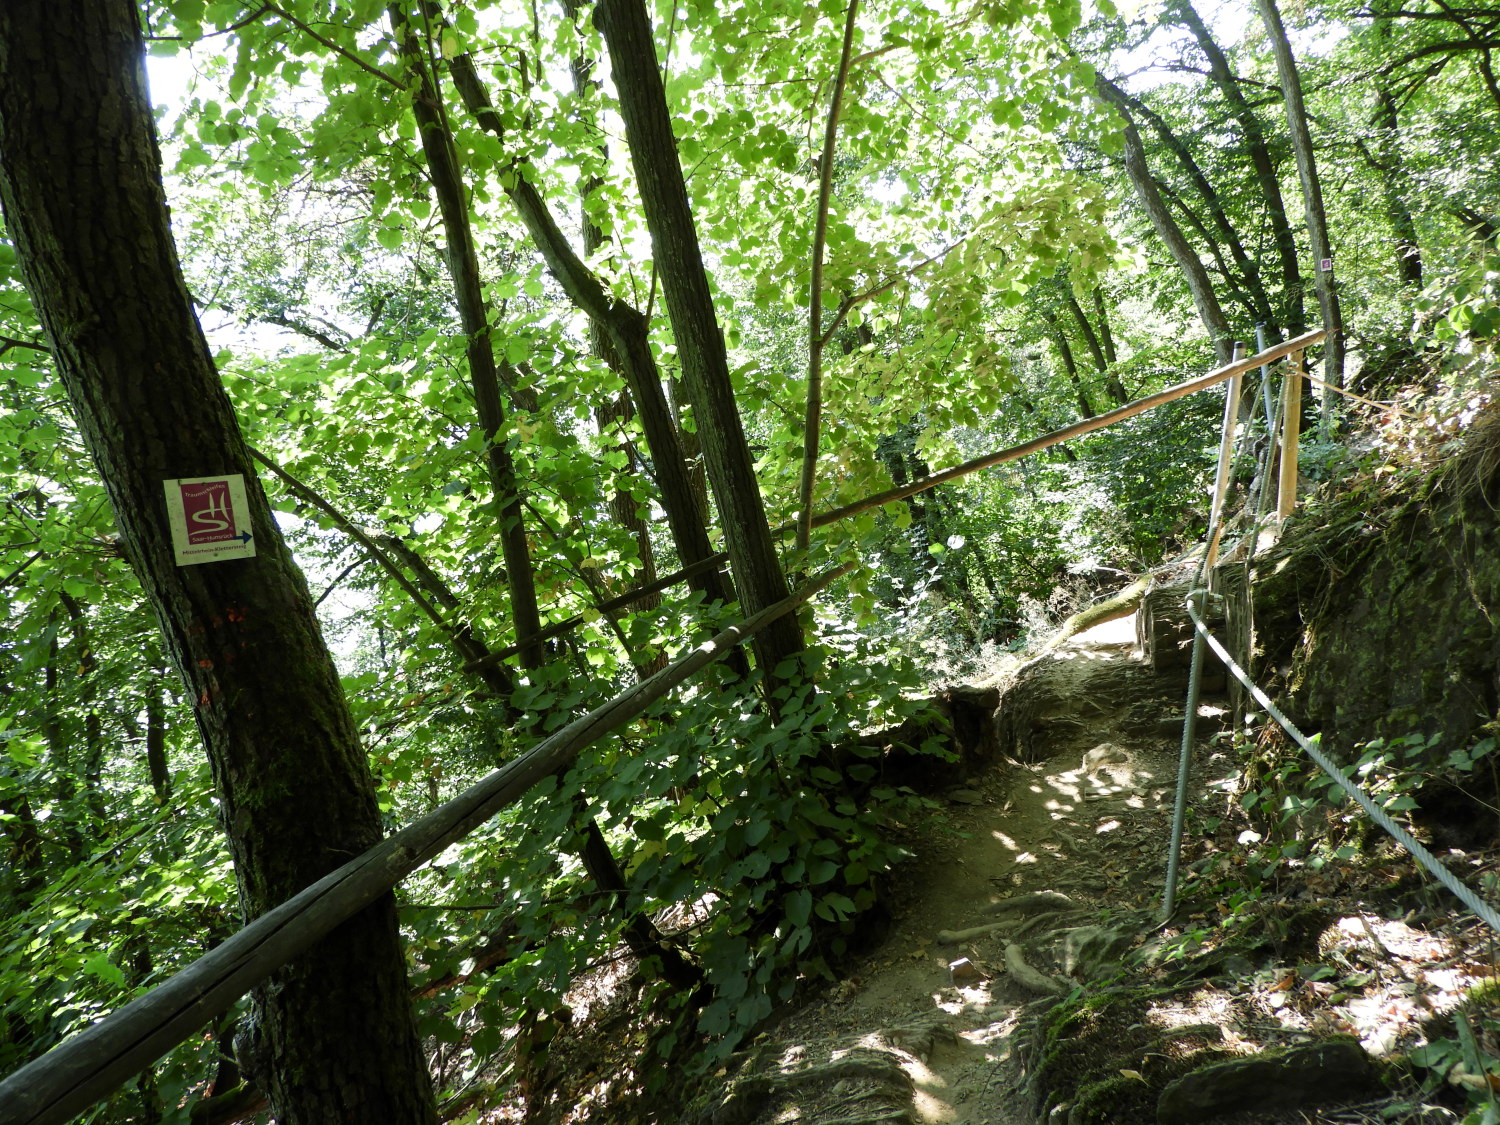 On the Klettervariante path